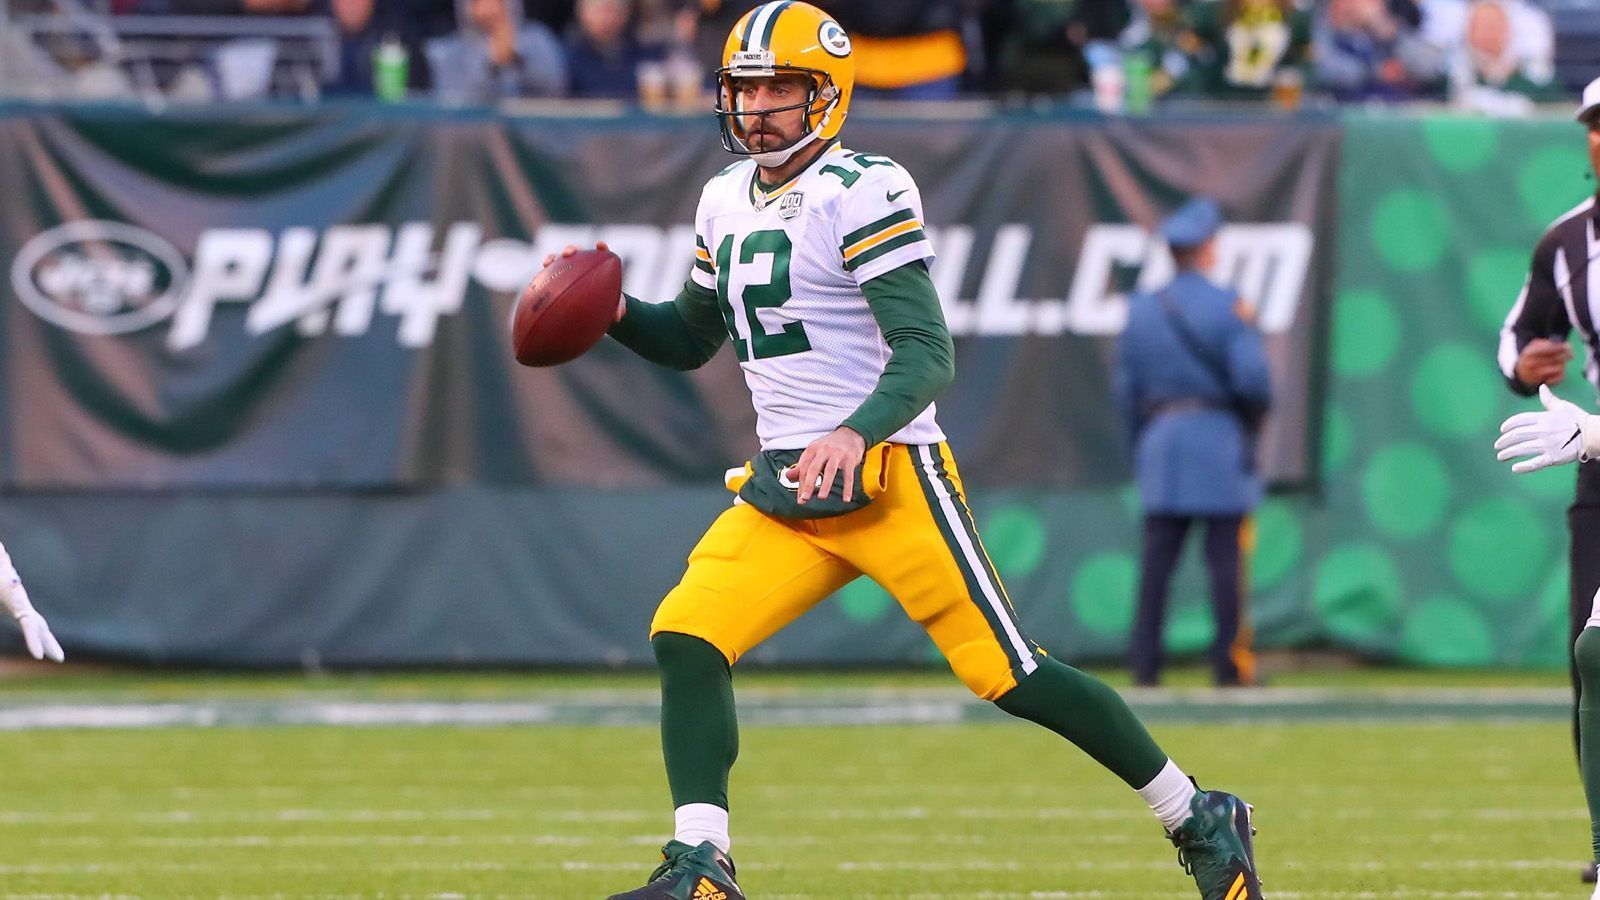 
                <strong>Platz 7: Aaron Rodgers</strong><br>
                Team: Green Bay PackersPosition: Quarterback
              